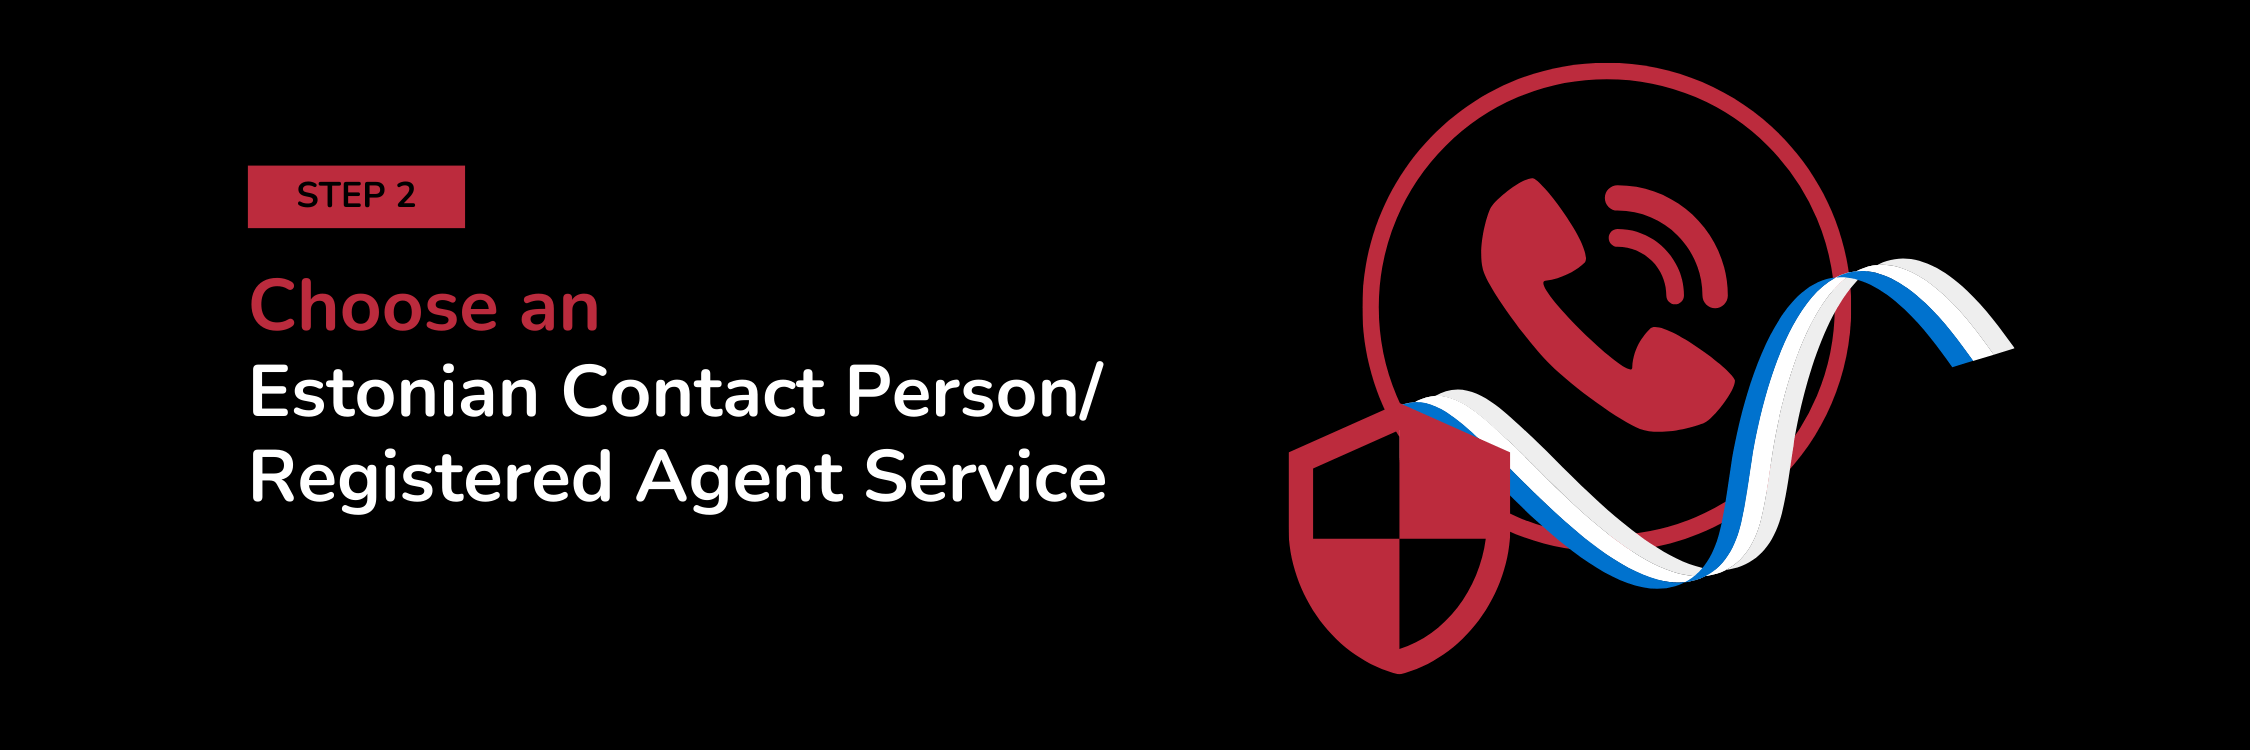 Step 2: Choose an Estonian Contact Person/Registered Agent Service